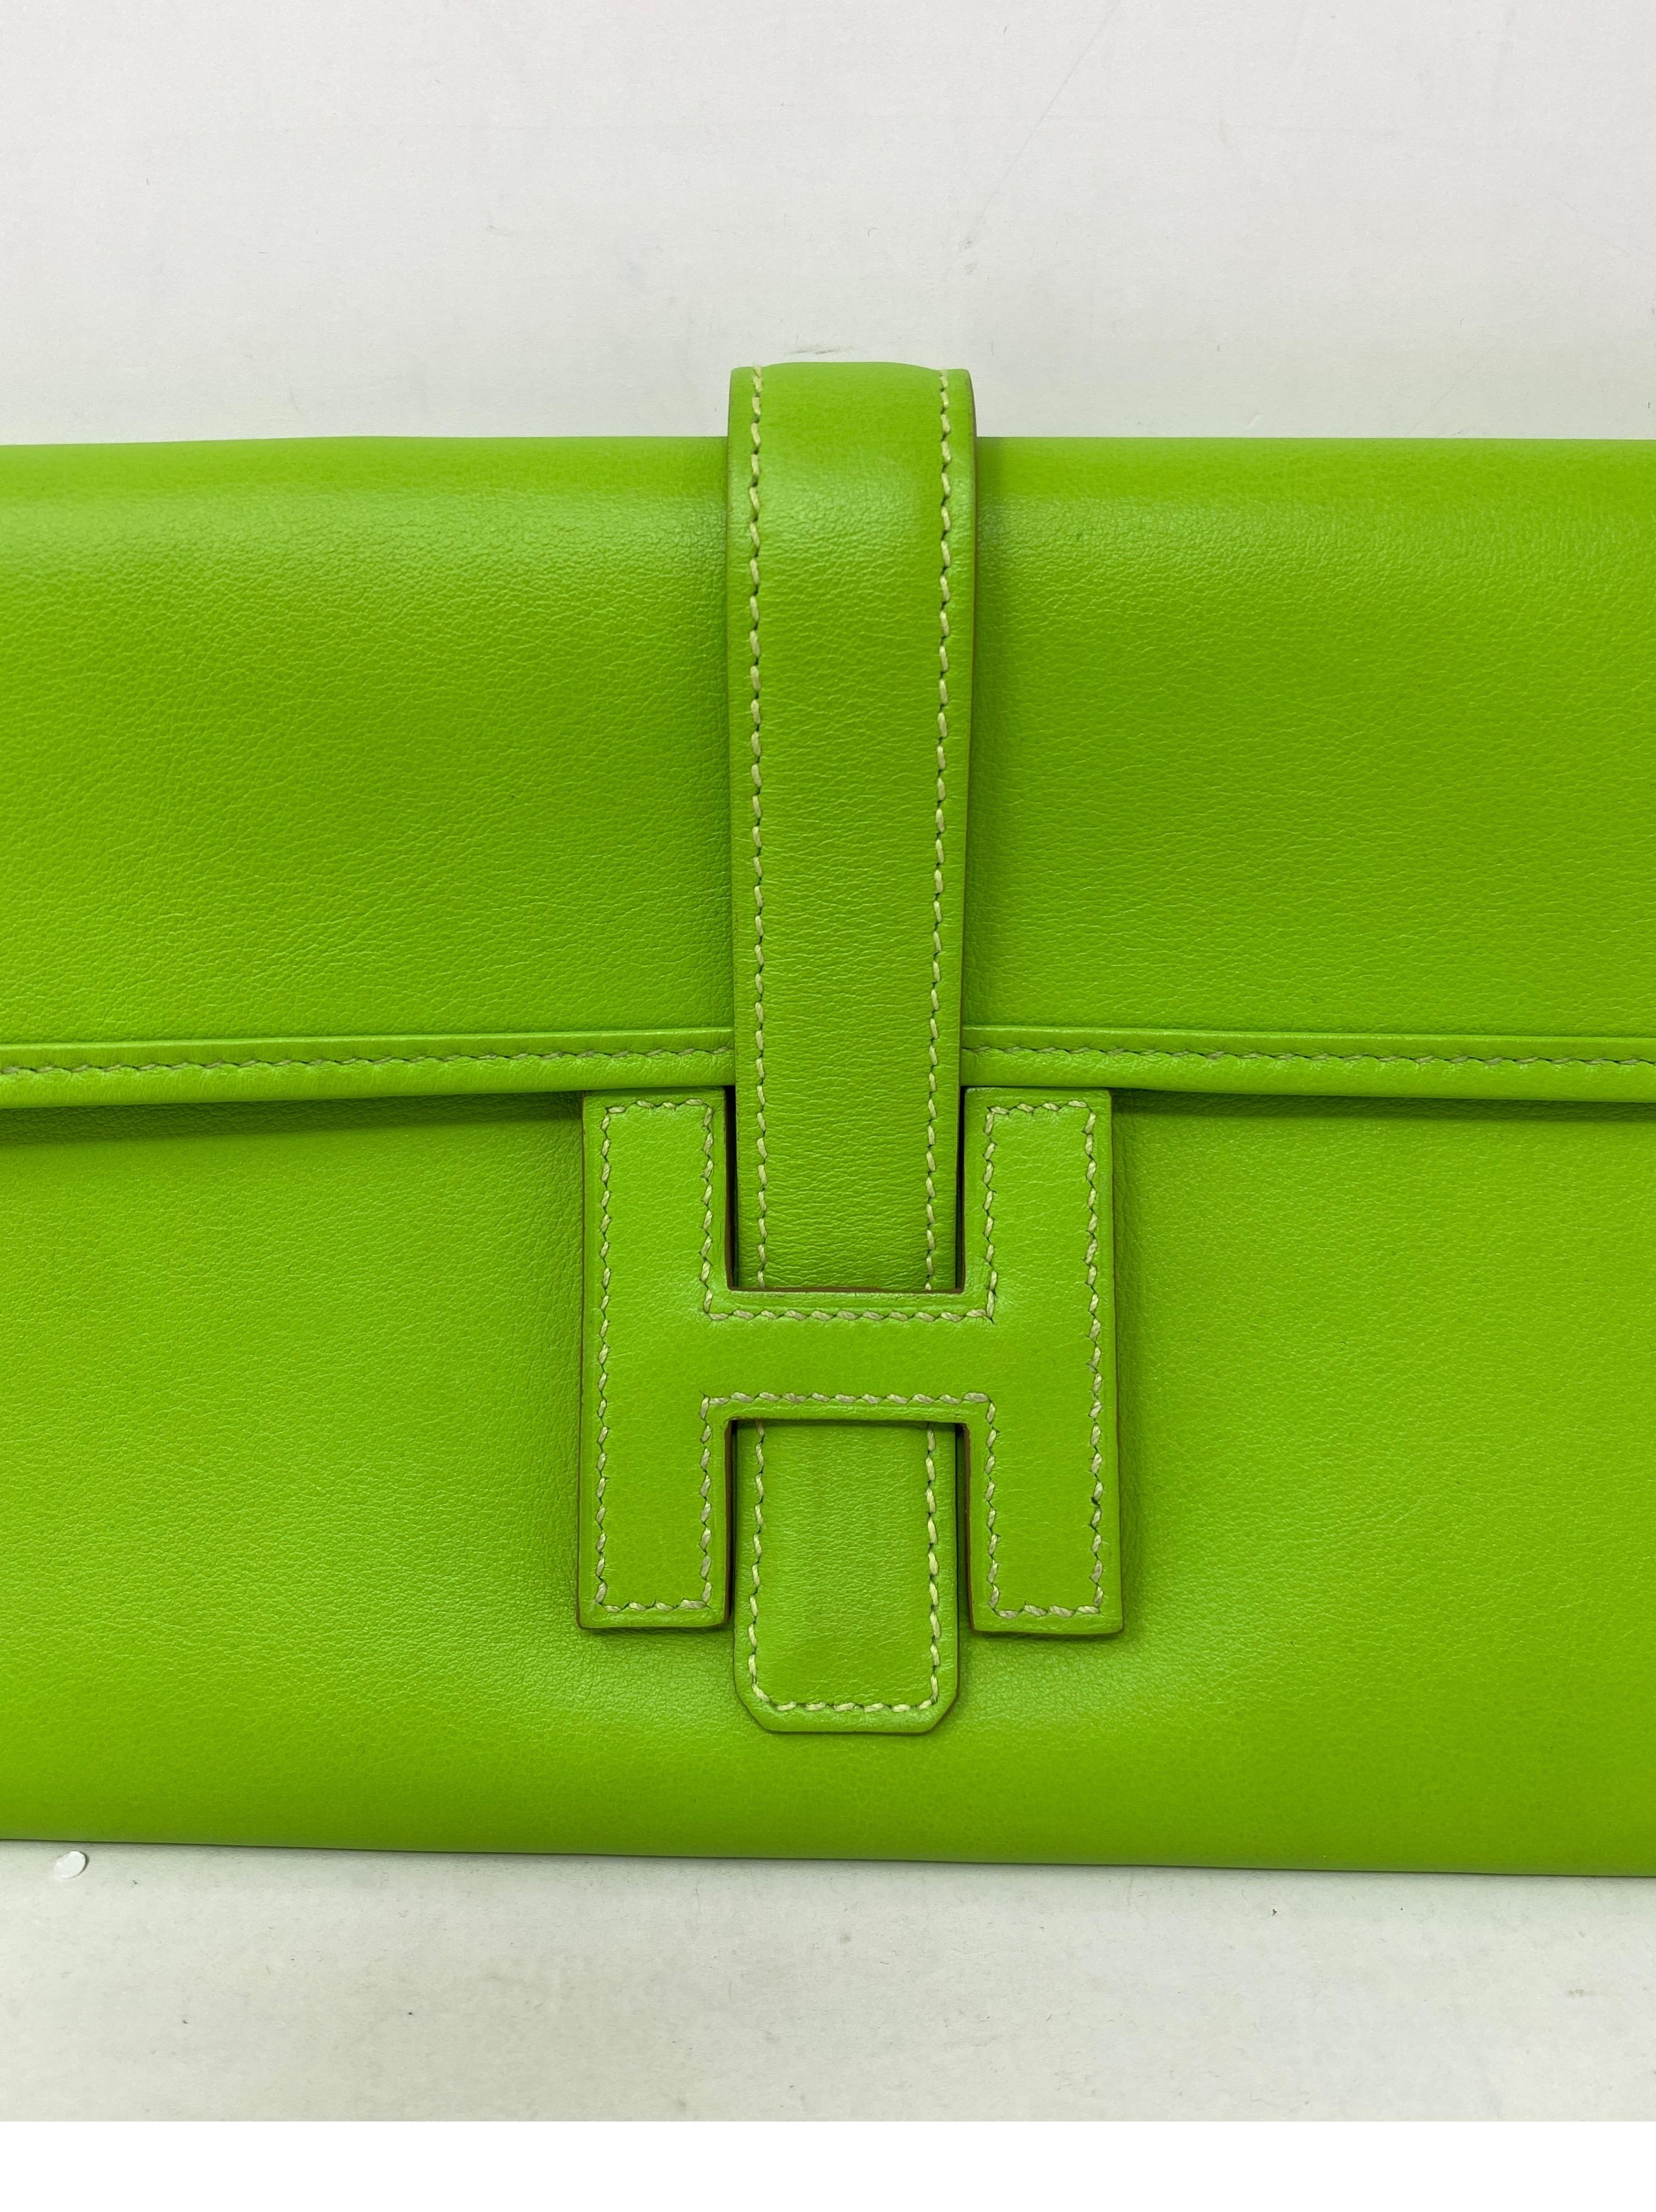 Hermes Lime Green Jige Clutch. Good condition. Bright lime green color. Guaranteed authentic. 